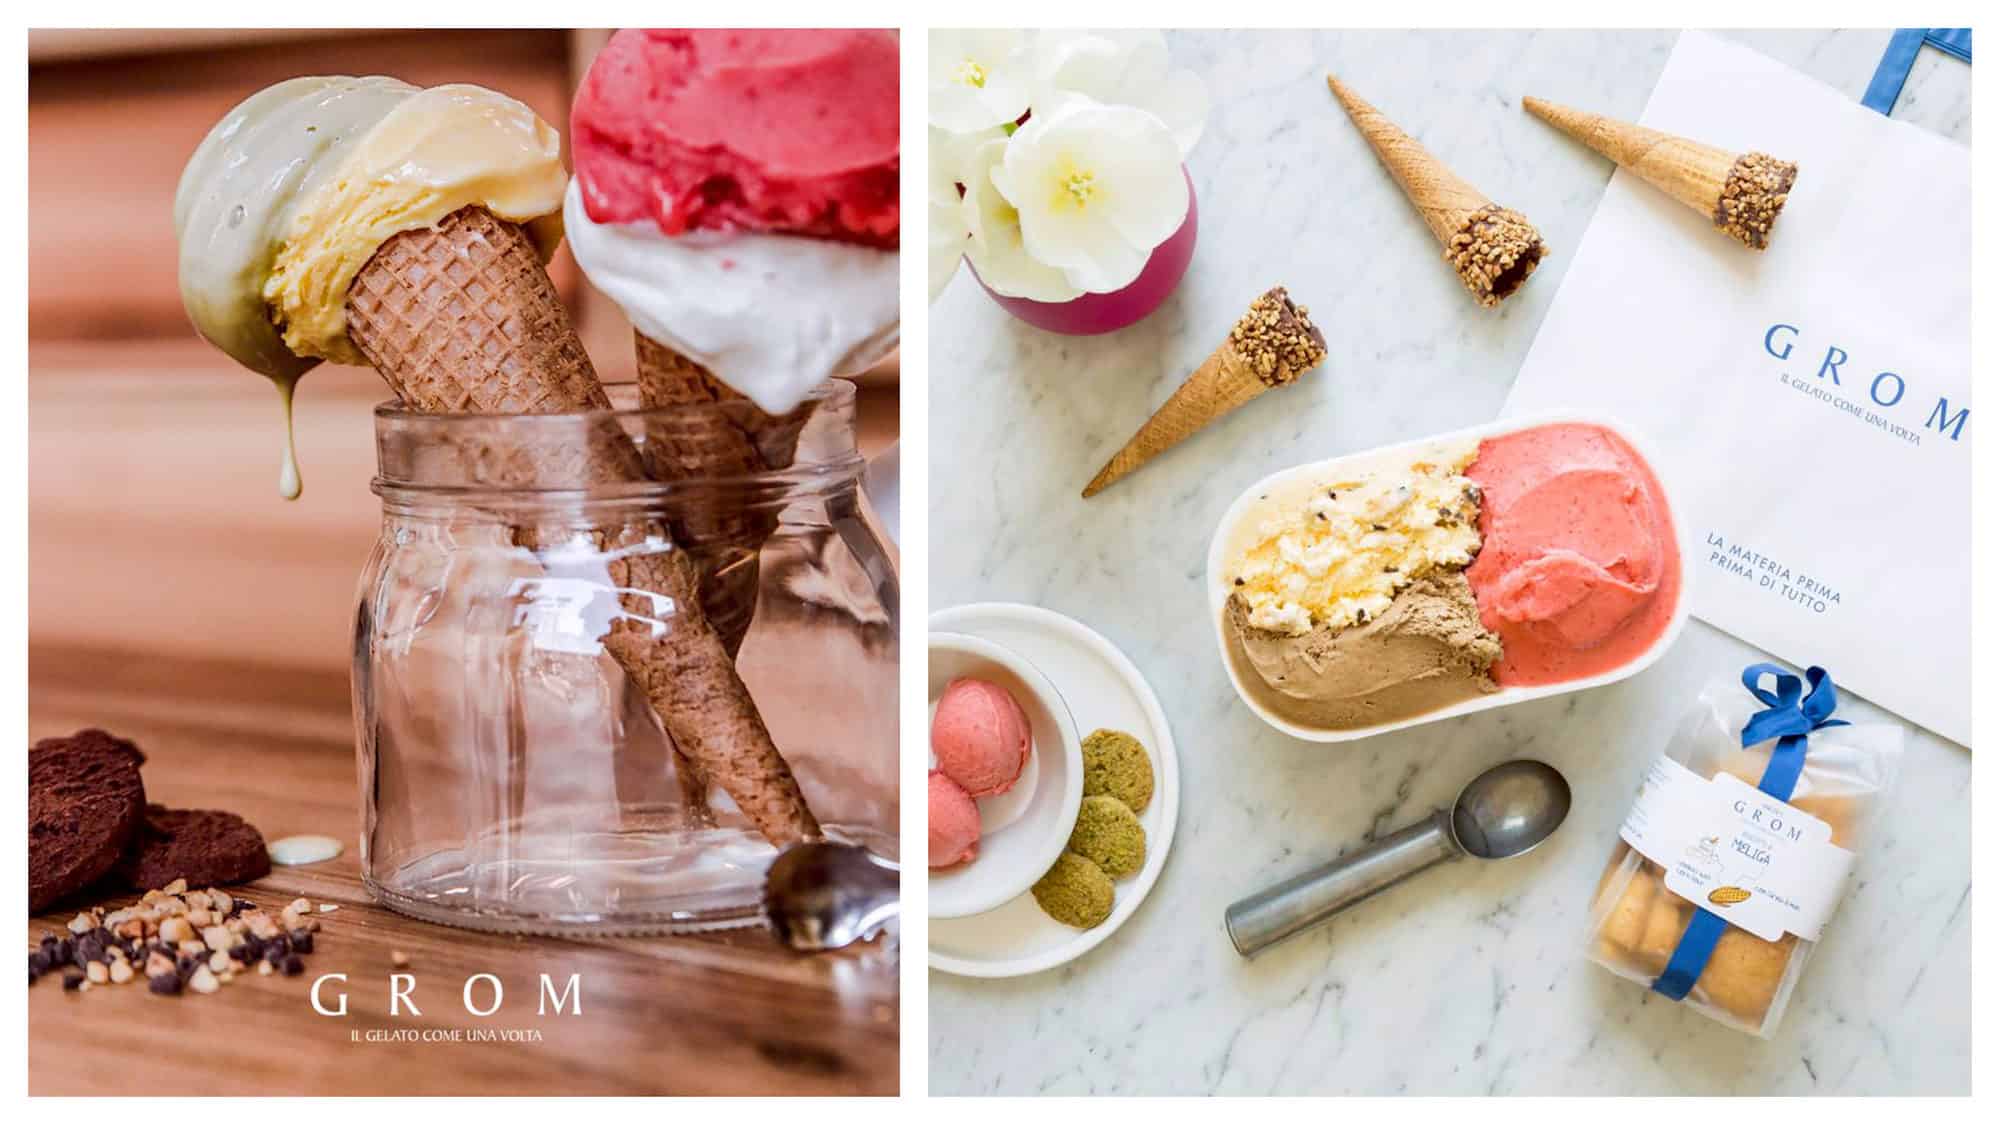 Colorful gluten-free ice cream in Paris from GROM.